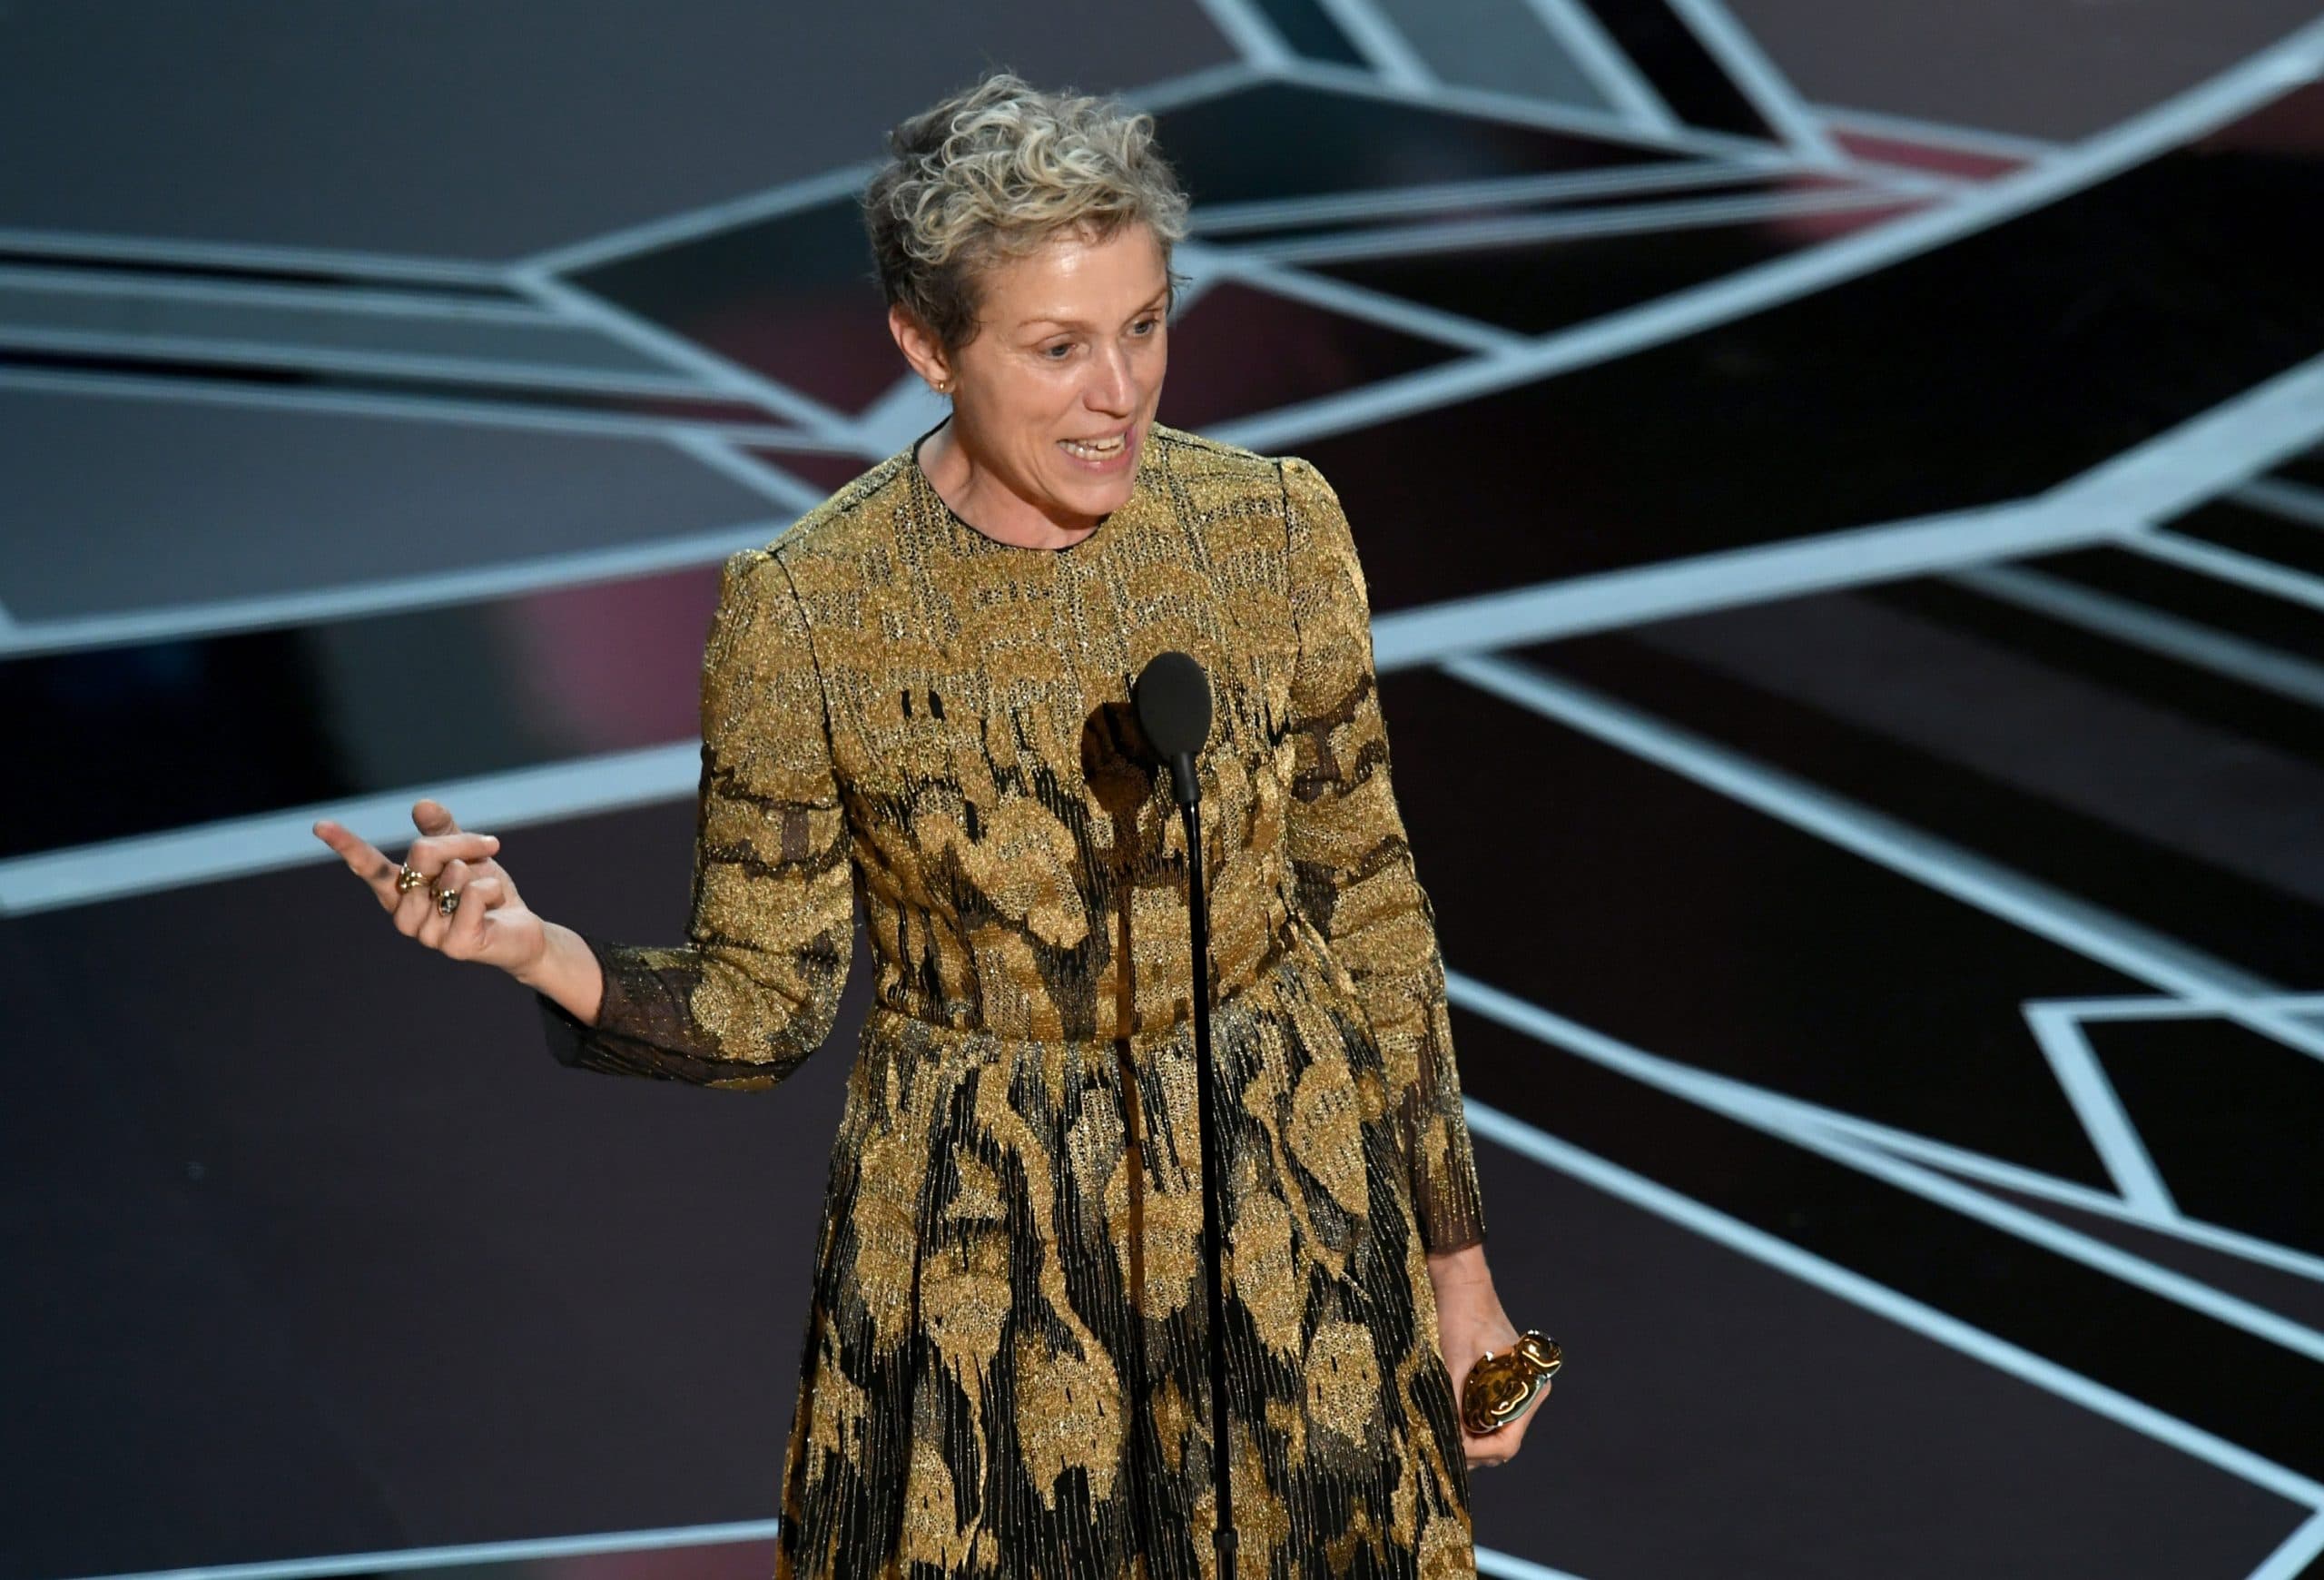 HOLLYWOOD, CA - MARCH 04:  Actor Frances McDormand accepts Best Actress for 'Three Billboards Outside Ebbing, Missouri' onstage during the 90th Annual Academy Awards at the Dolby Theatre at Hollywood &amp; Highland Center on March 4, 2018 in Hollywood, California.  (Photo by Kevin Winter/Getty Images)